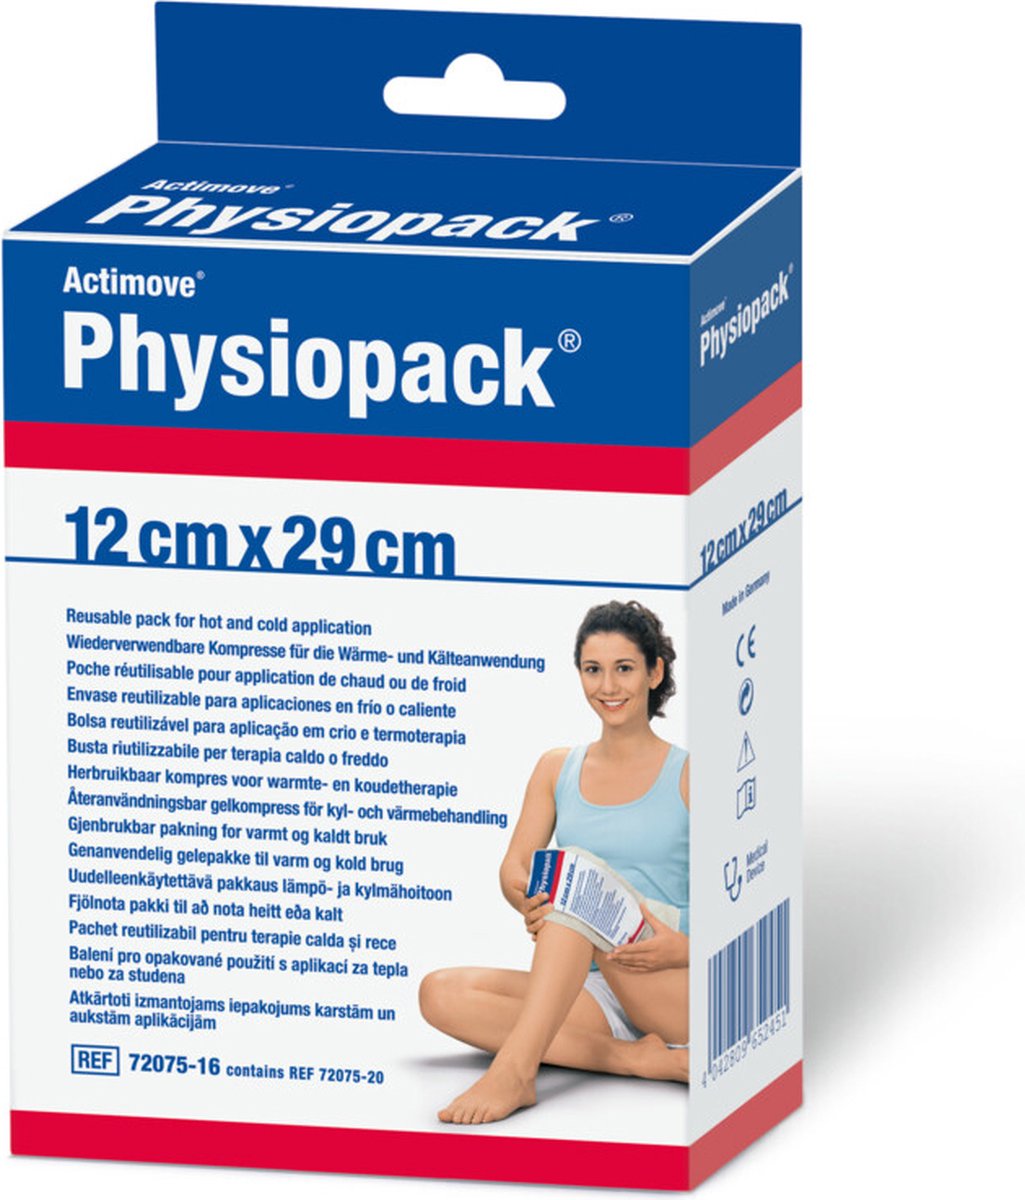 3x Actimove Physiopack Hot/Cold Pack